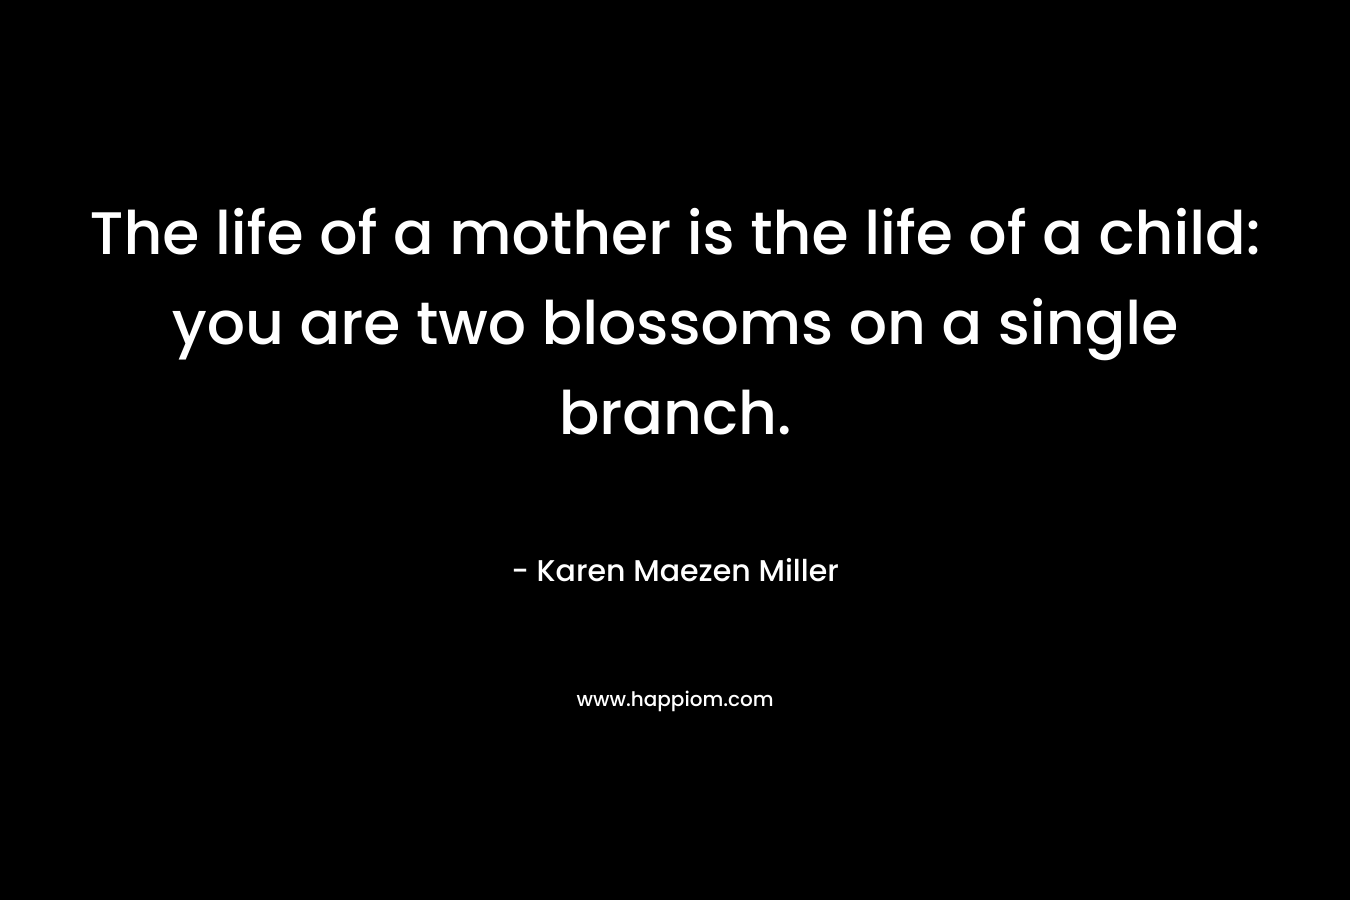 The life of a mother is the life of a child: you are two blossoms on a single branch. – Karen Maezen Miller